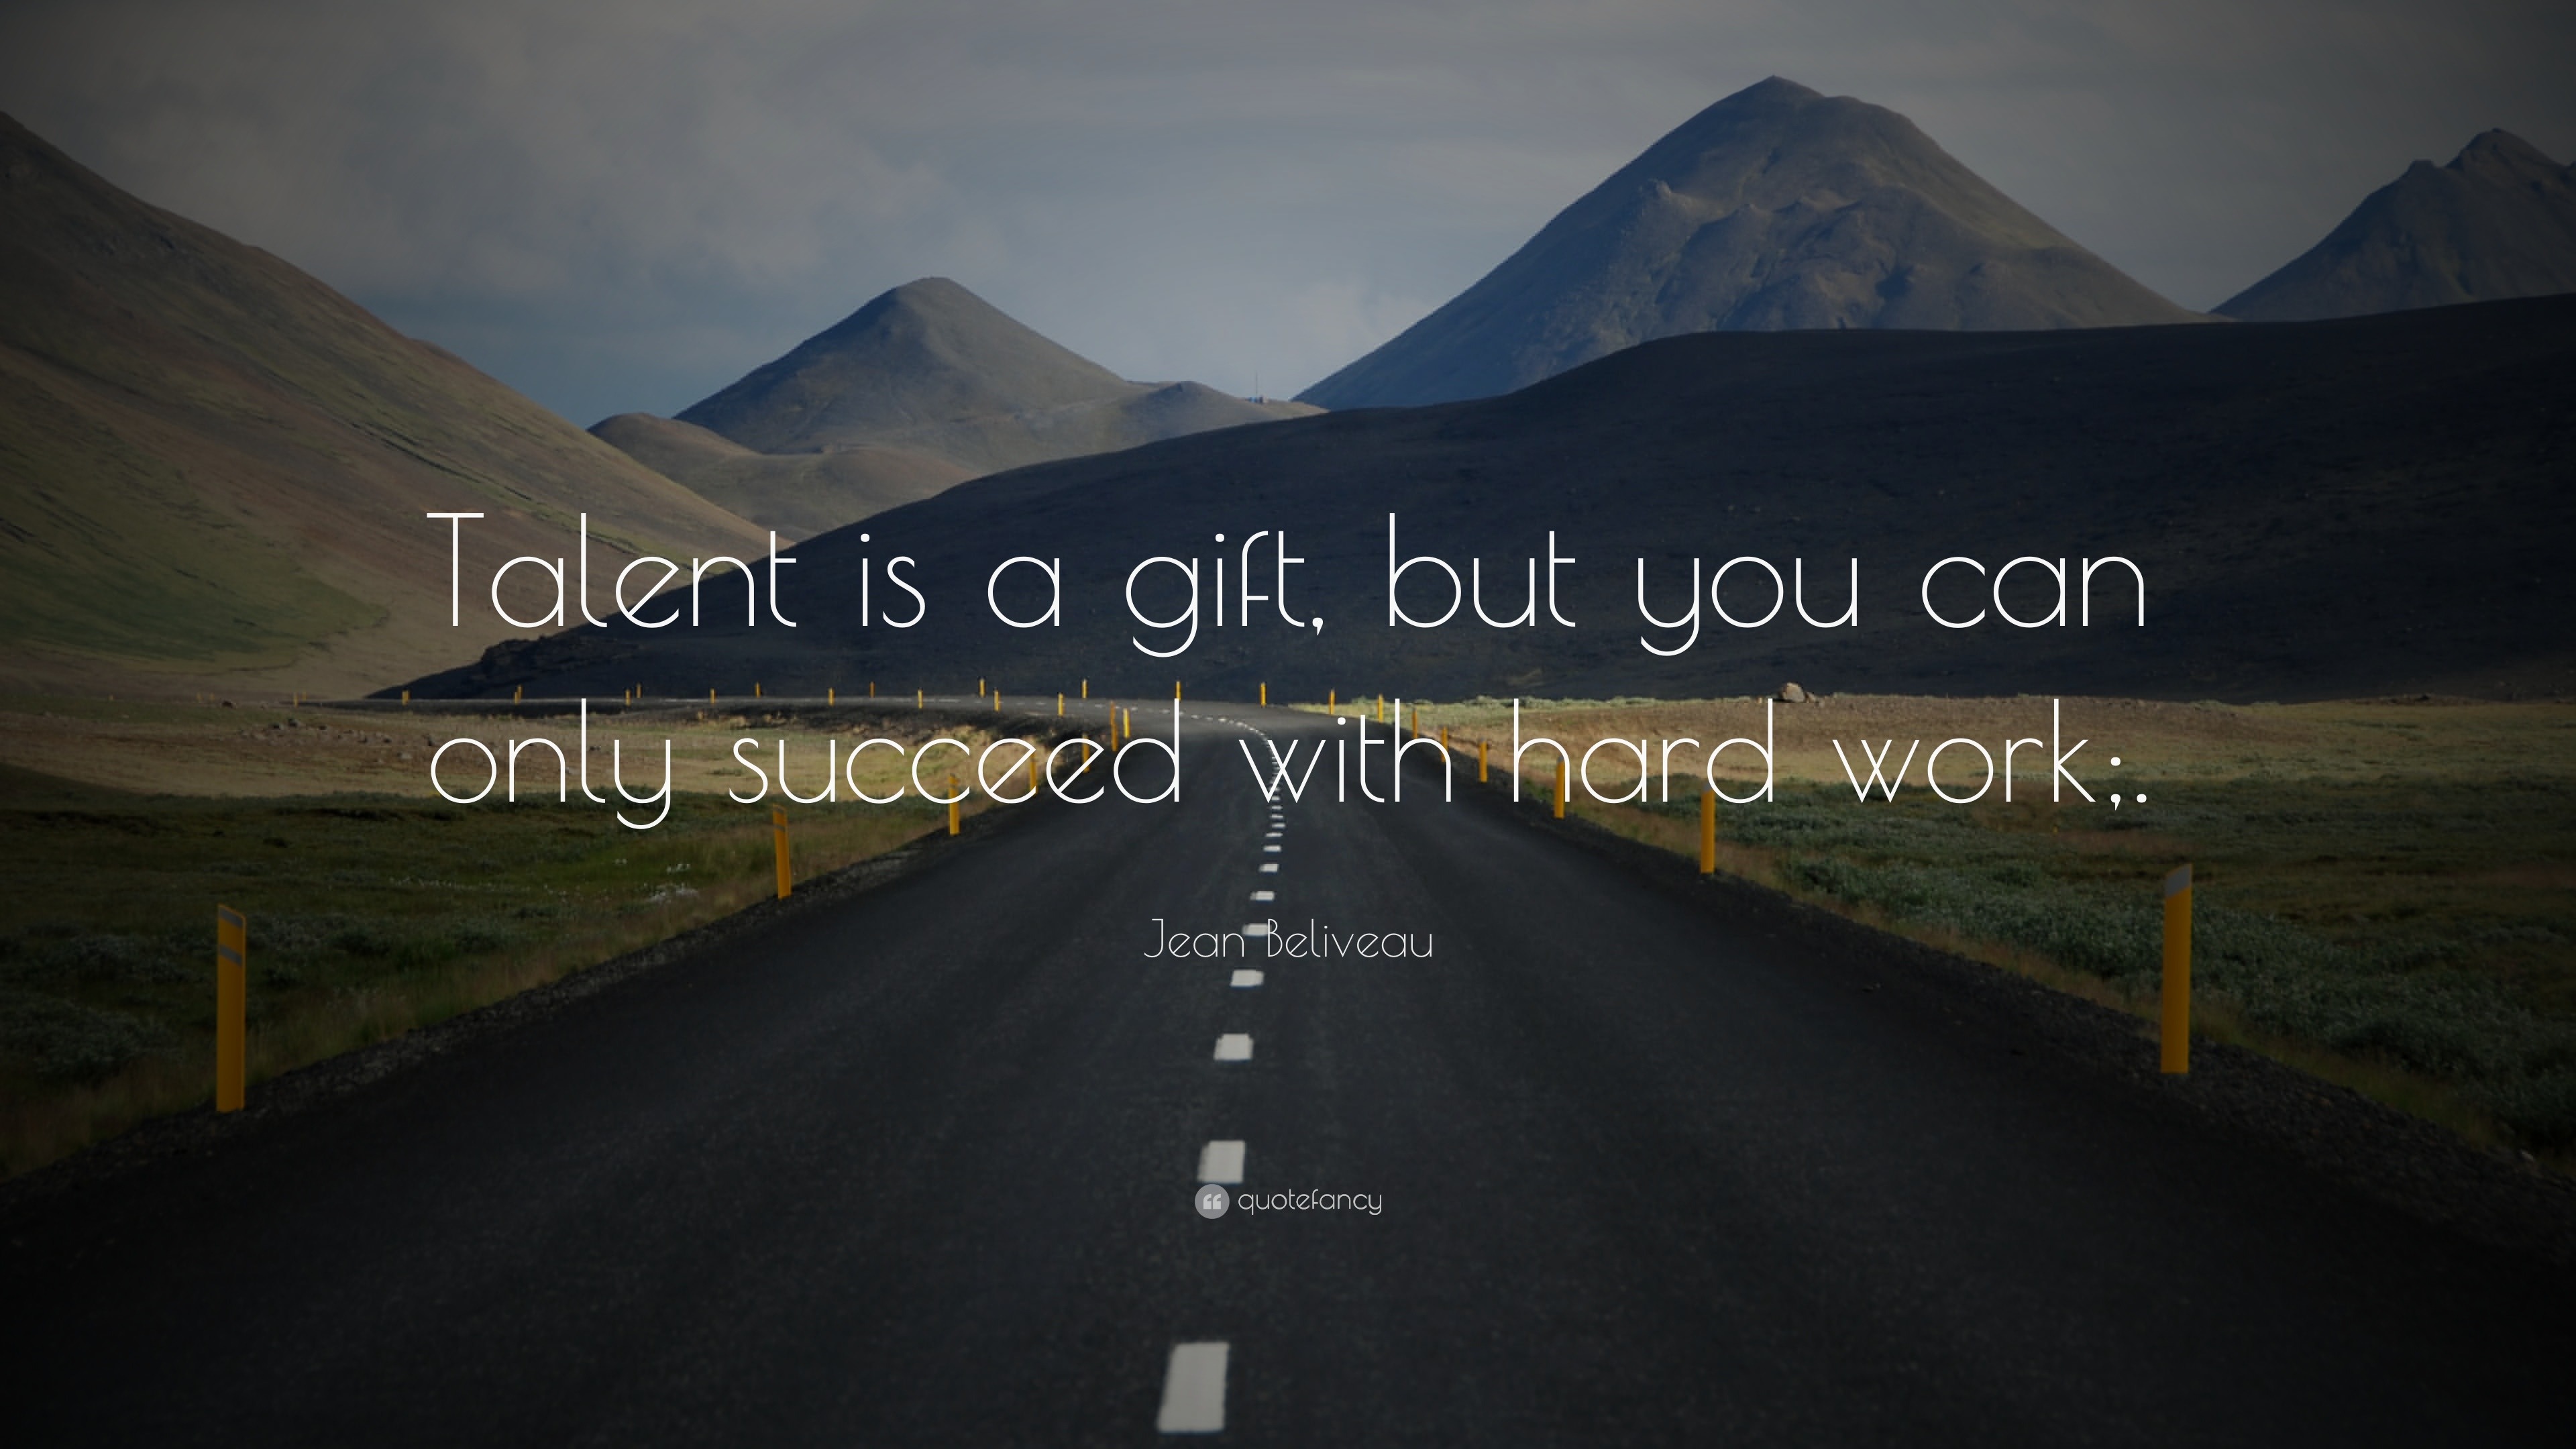 Jean Beliveau Quote Talent is a gift but you can only succeed with hard  work